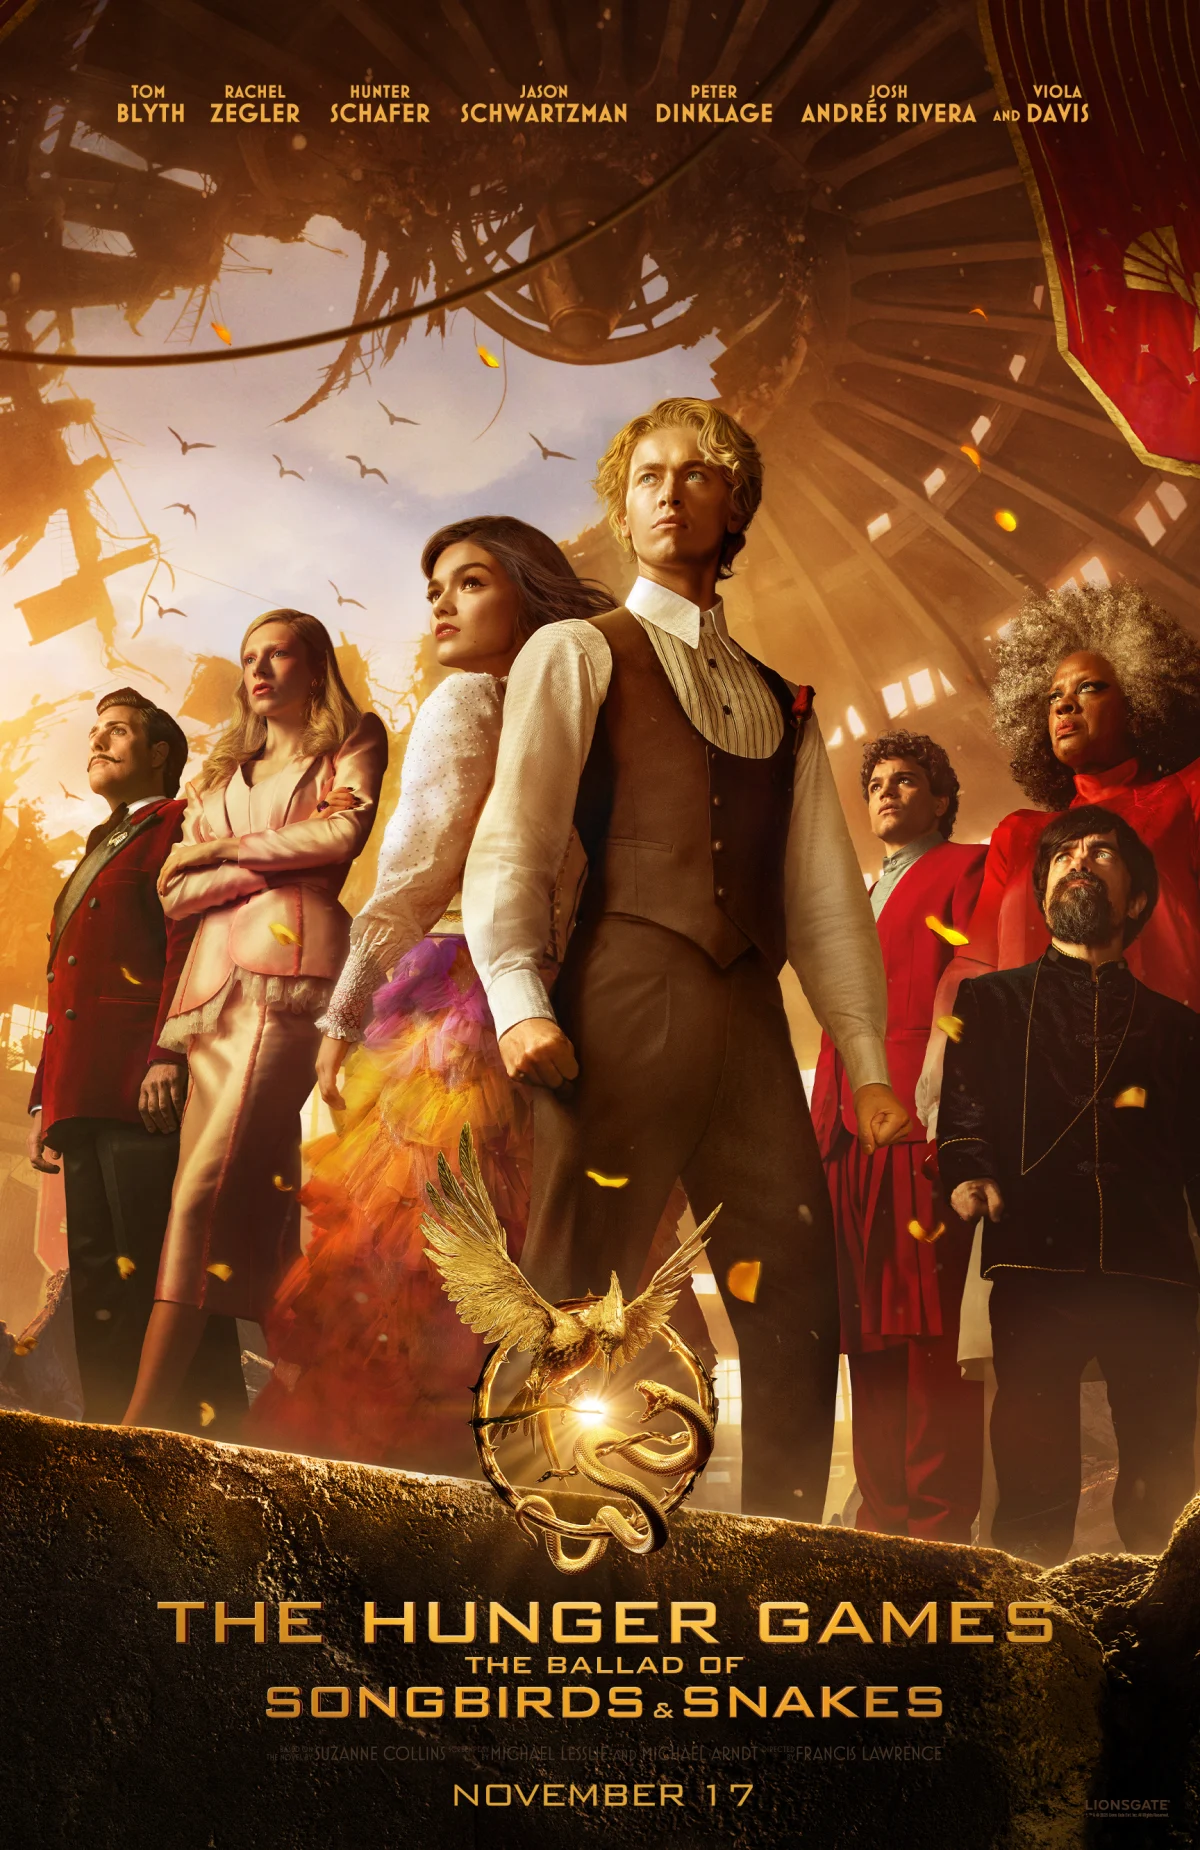 TV & FILM GIFs — The Hunger Games: The Ballad of Songbirds and